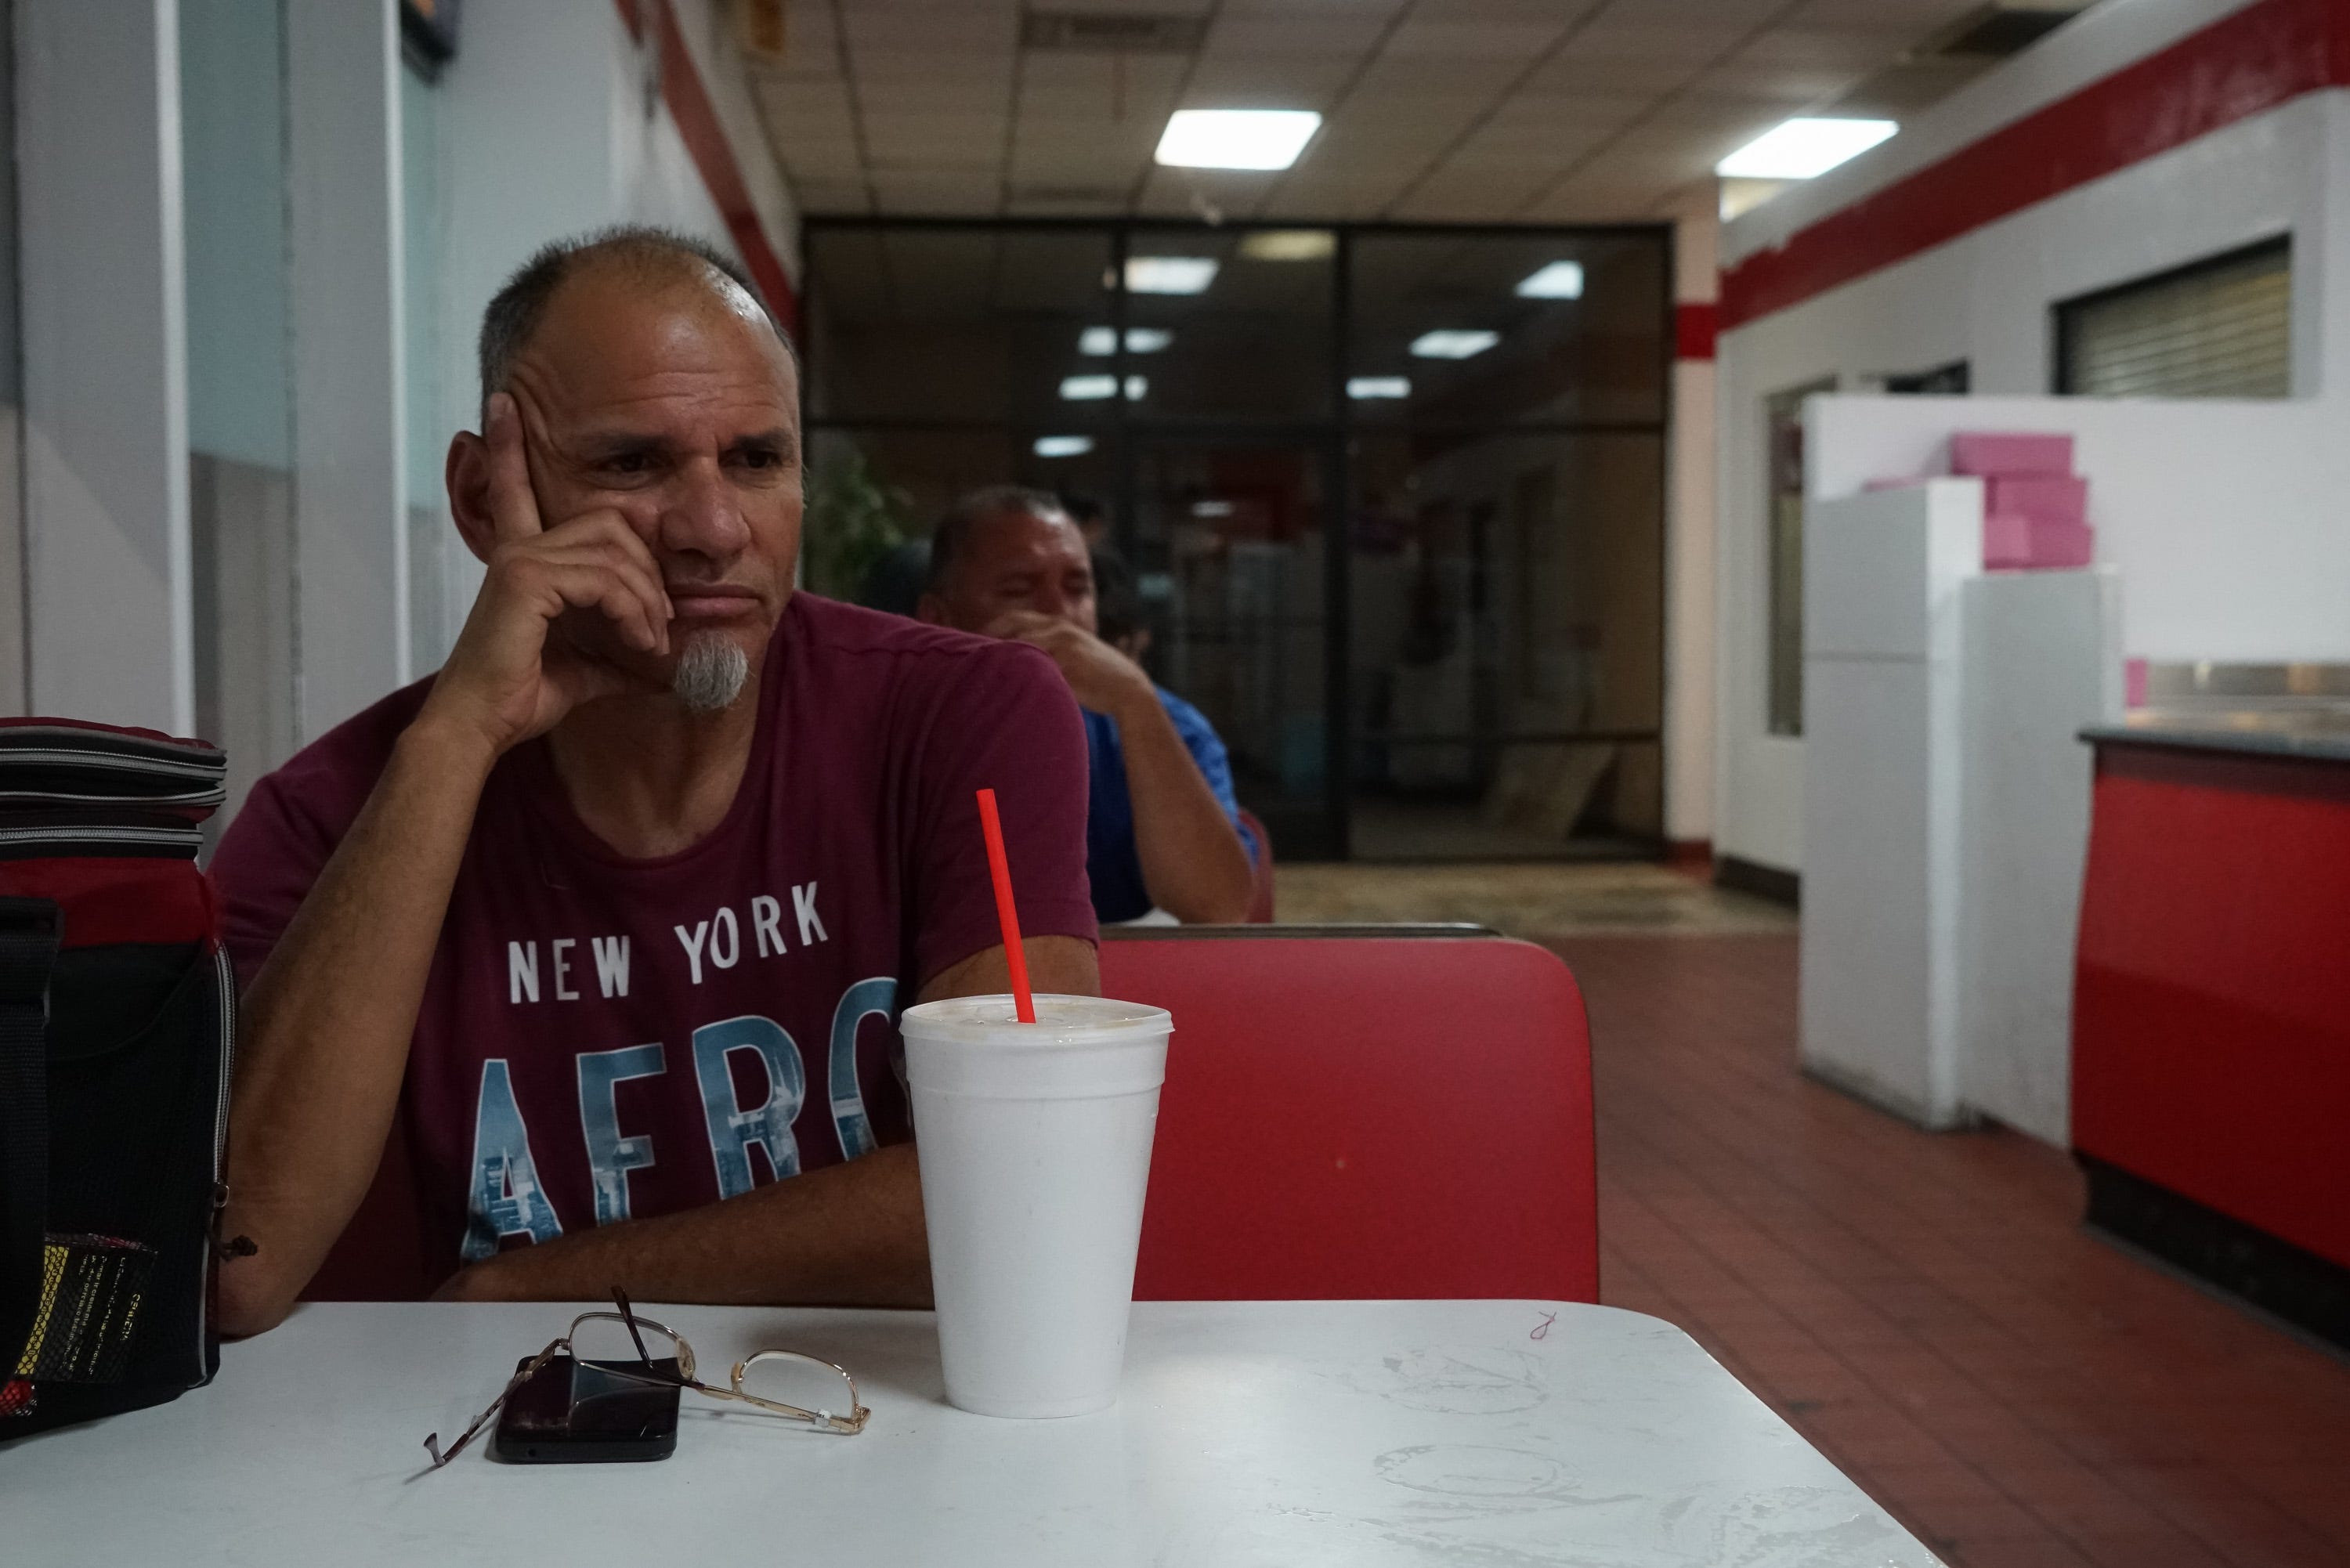 Fernando Bastidas waits at Donut Avenue before heading to his overnight shift at the Spreckels Plant in Brawley, Calexico, Calif., 11:00 PM,  June 11, 2019.